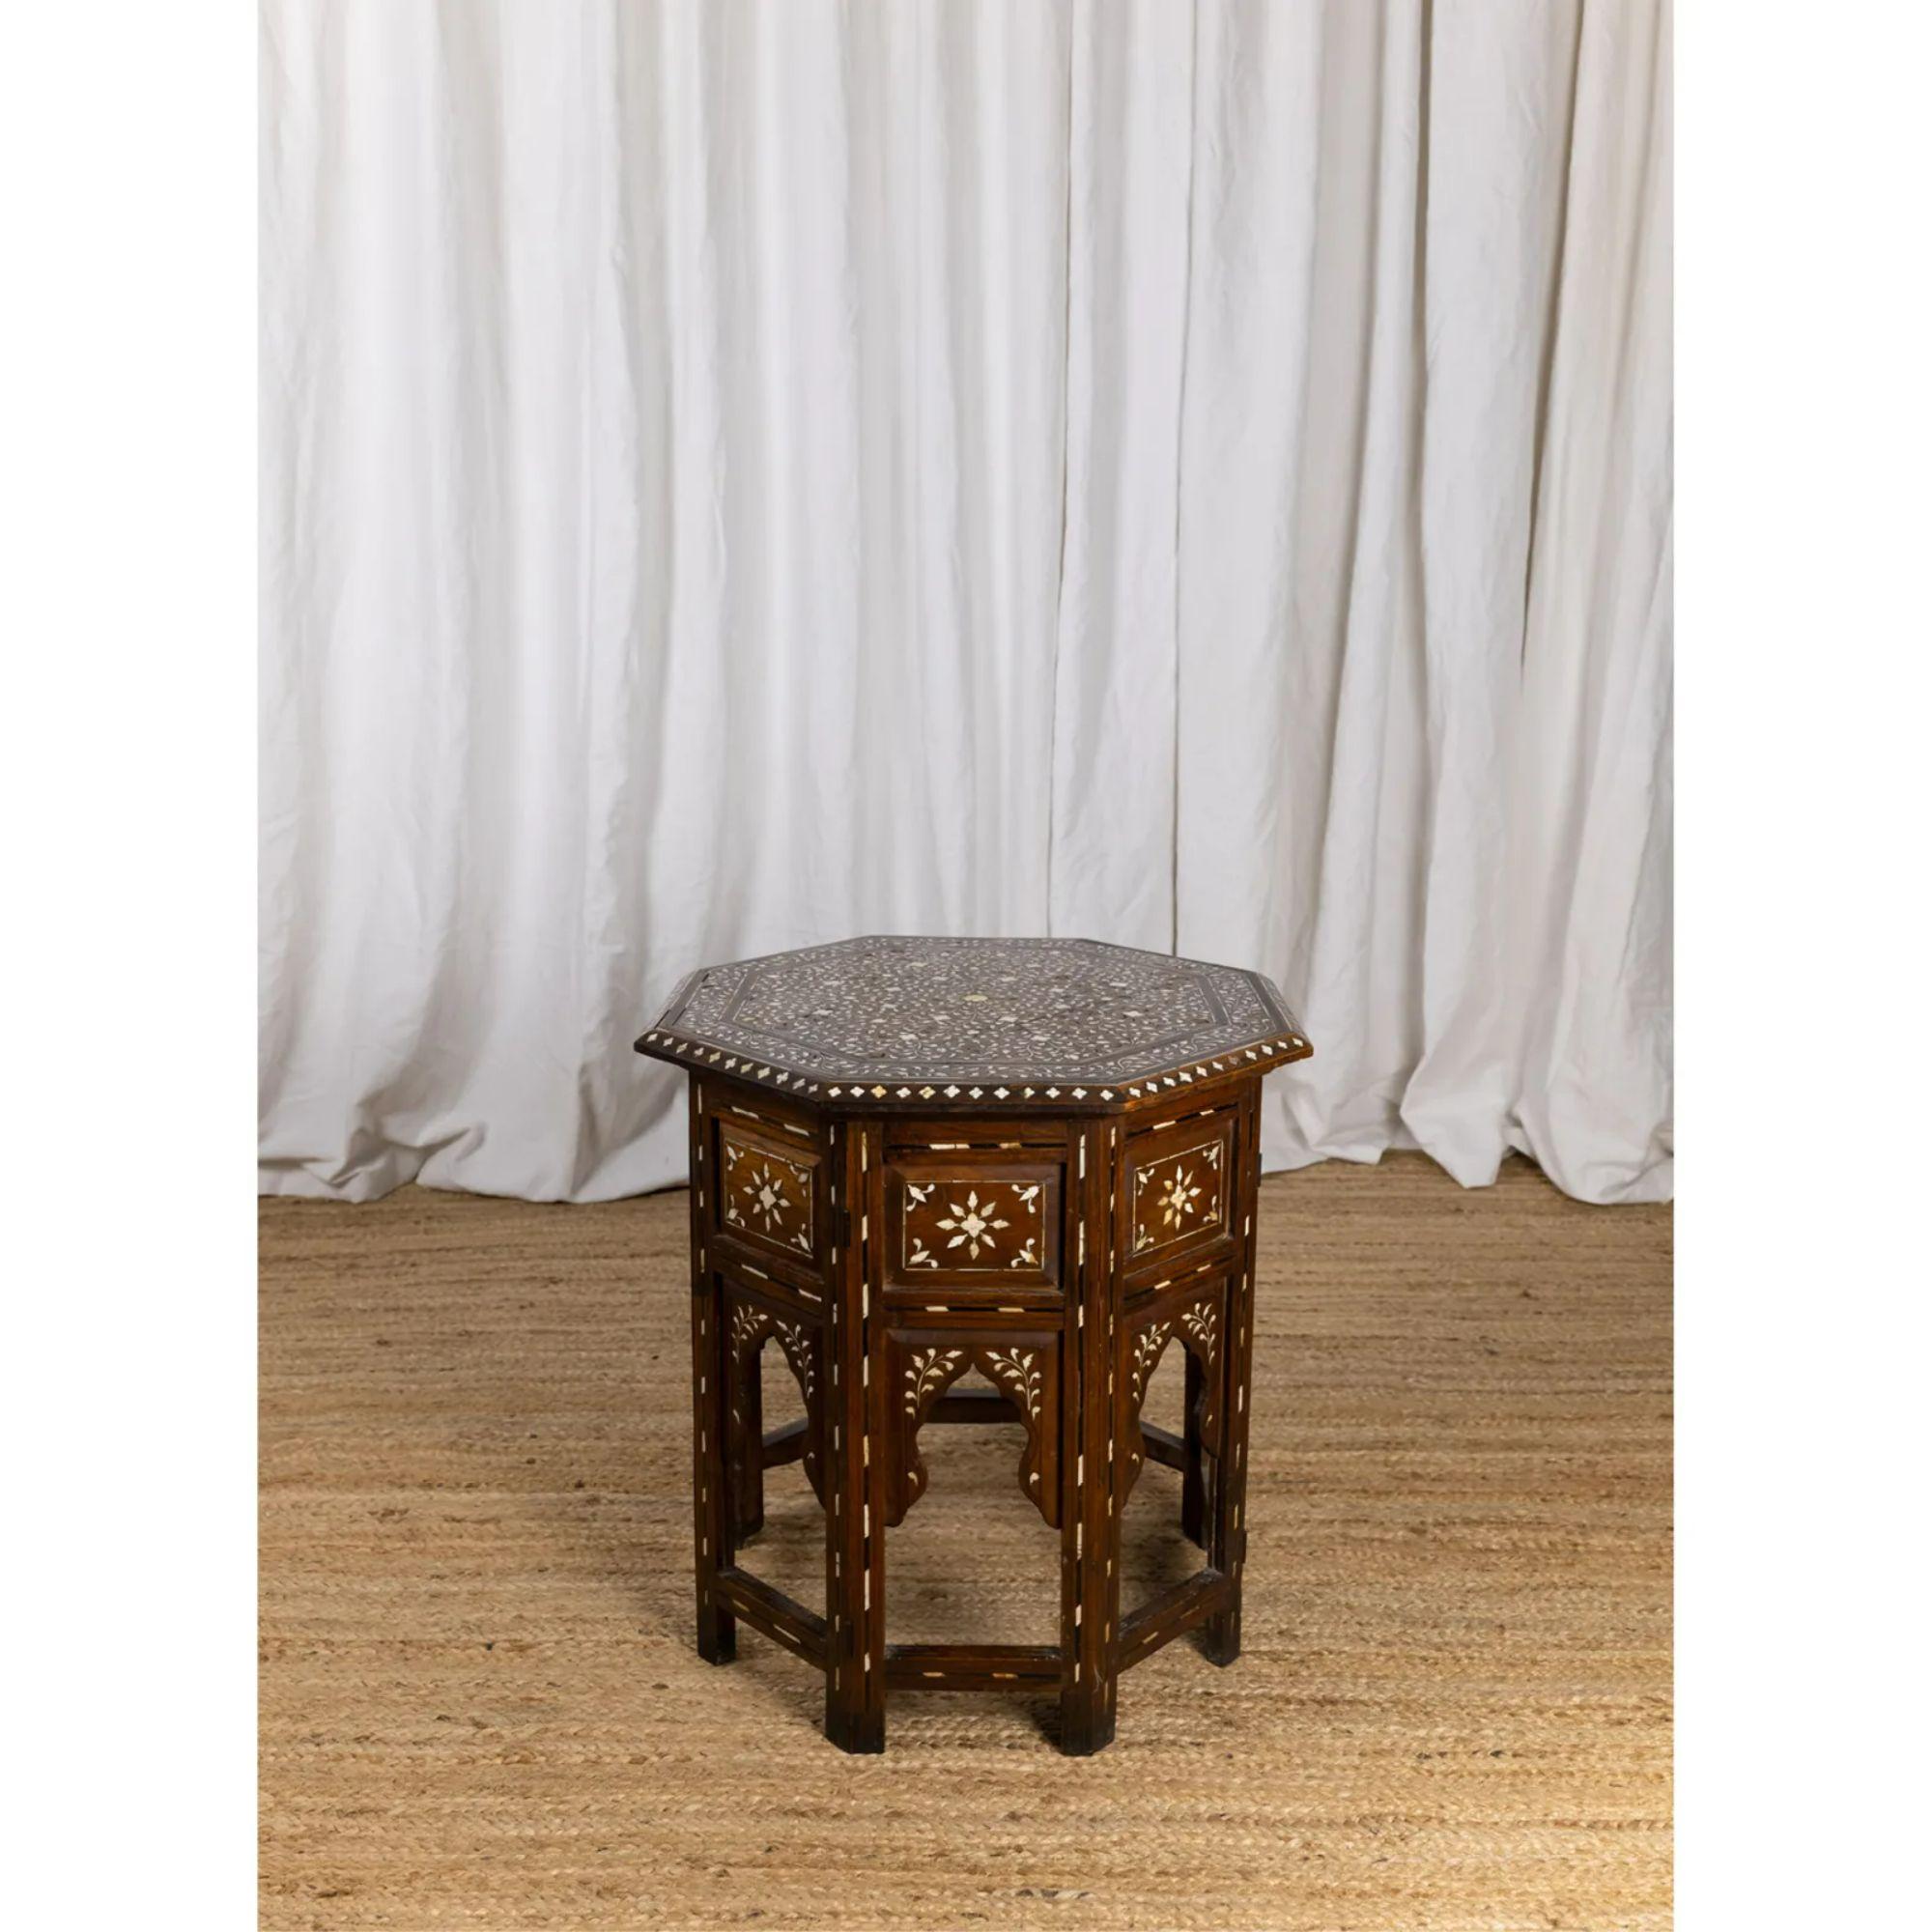 Fine Hoshiarpur octagonal table, 19th Century

A 19th Century Octagonal Anglo Indian Occasional Table Inlaid with Bone and Ebony Standing on a Folding Base with Shaped Arches.

For shipping to the US please contact before purchase to discuss CITES